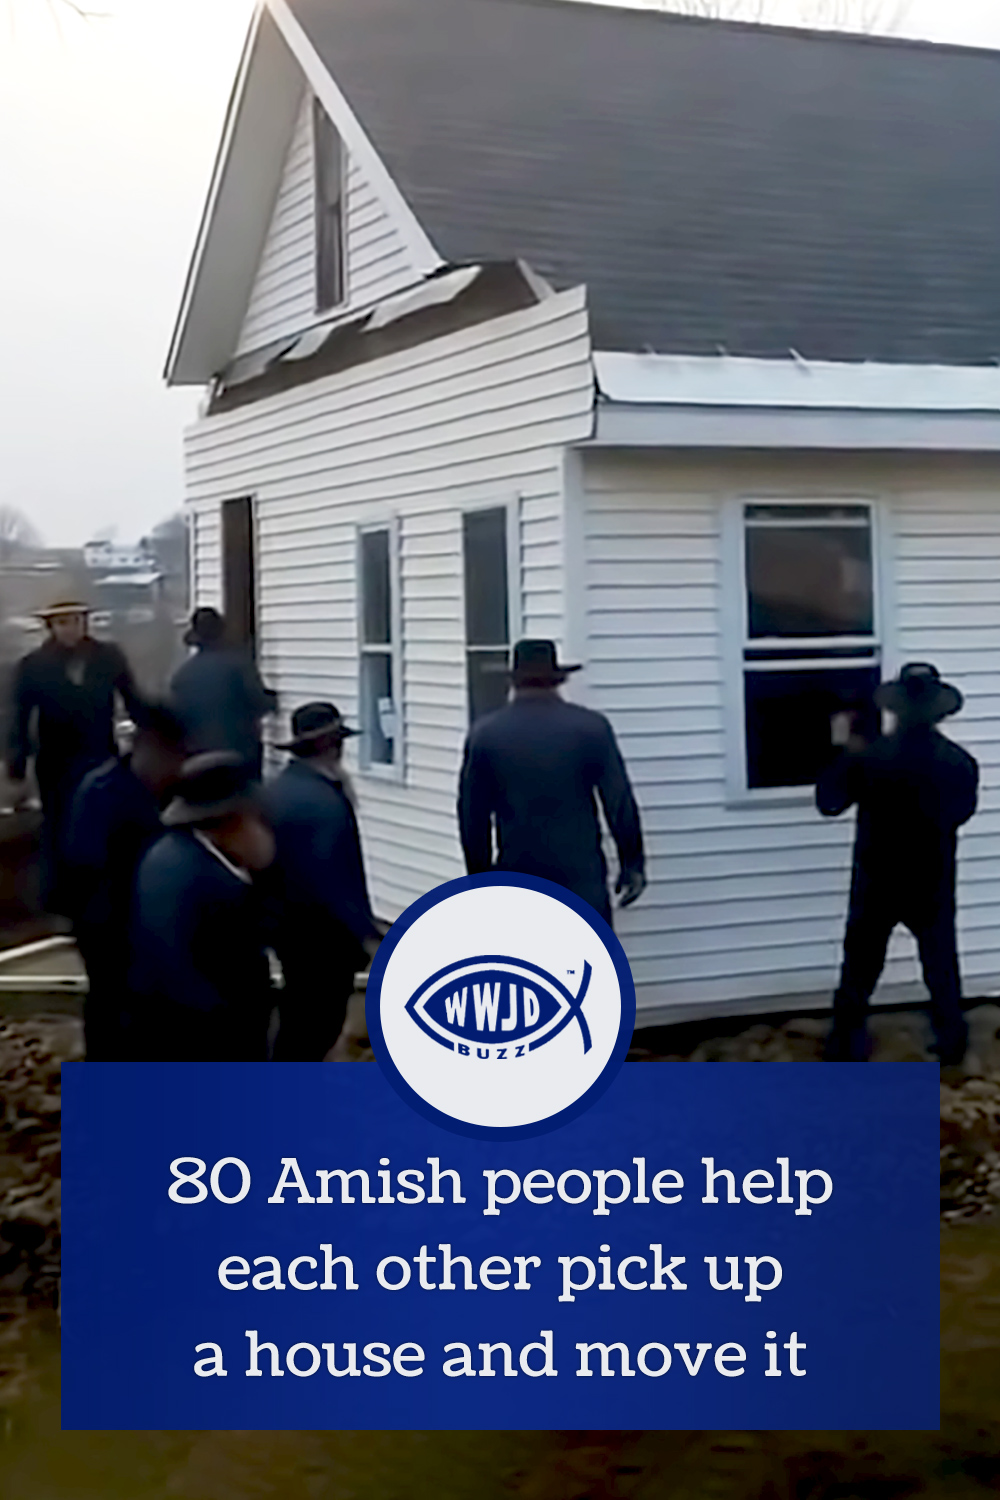 80 Amish people help each other pick up a house and move it